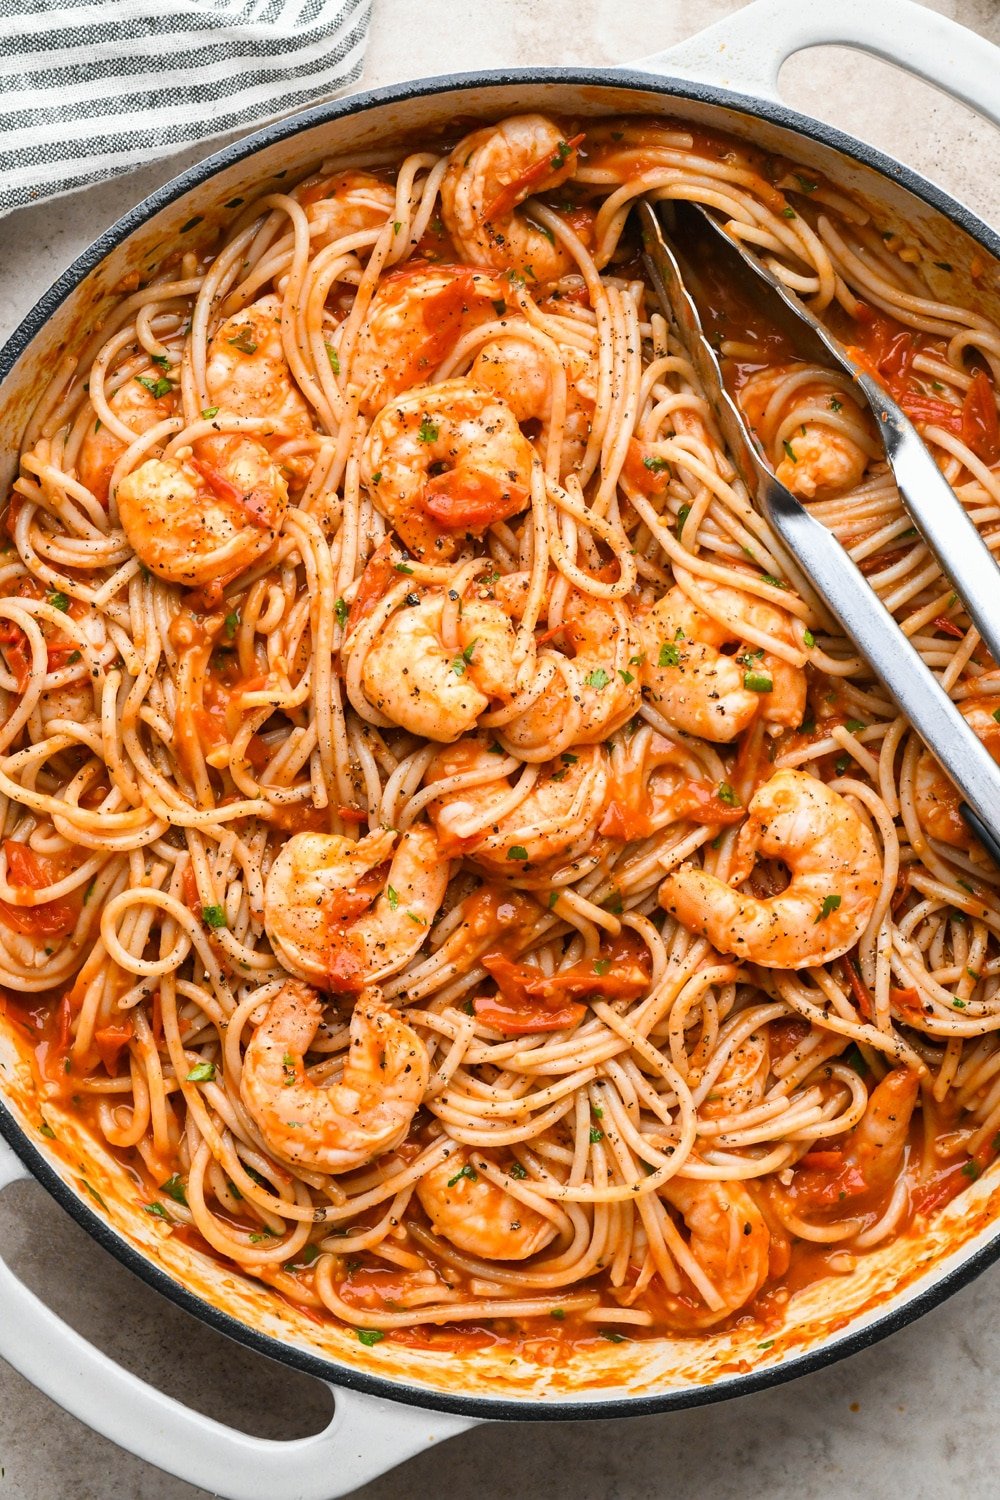 How to make Burst Cherry Tomato Shrimp Pasta: Cooked pasta and fresh parsley added to the skillet, after tossing to combine.